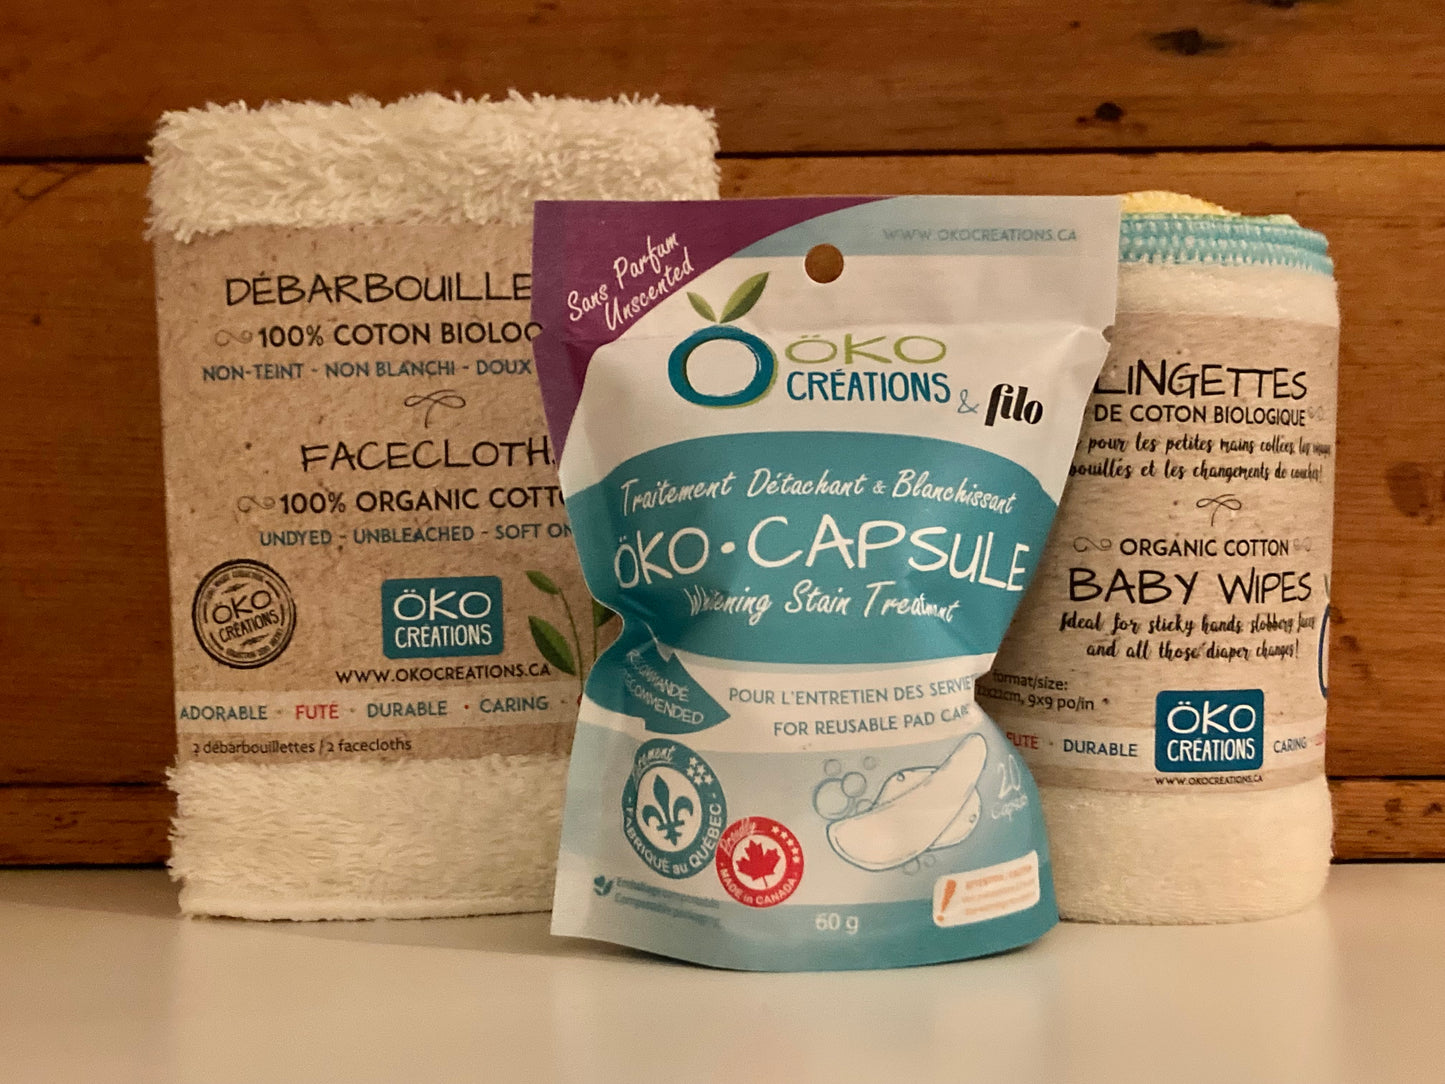 EcoHome - REUSABLE BABY WIPES!